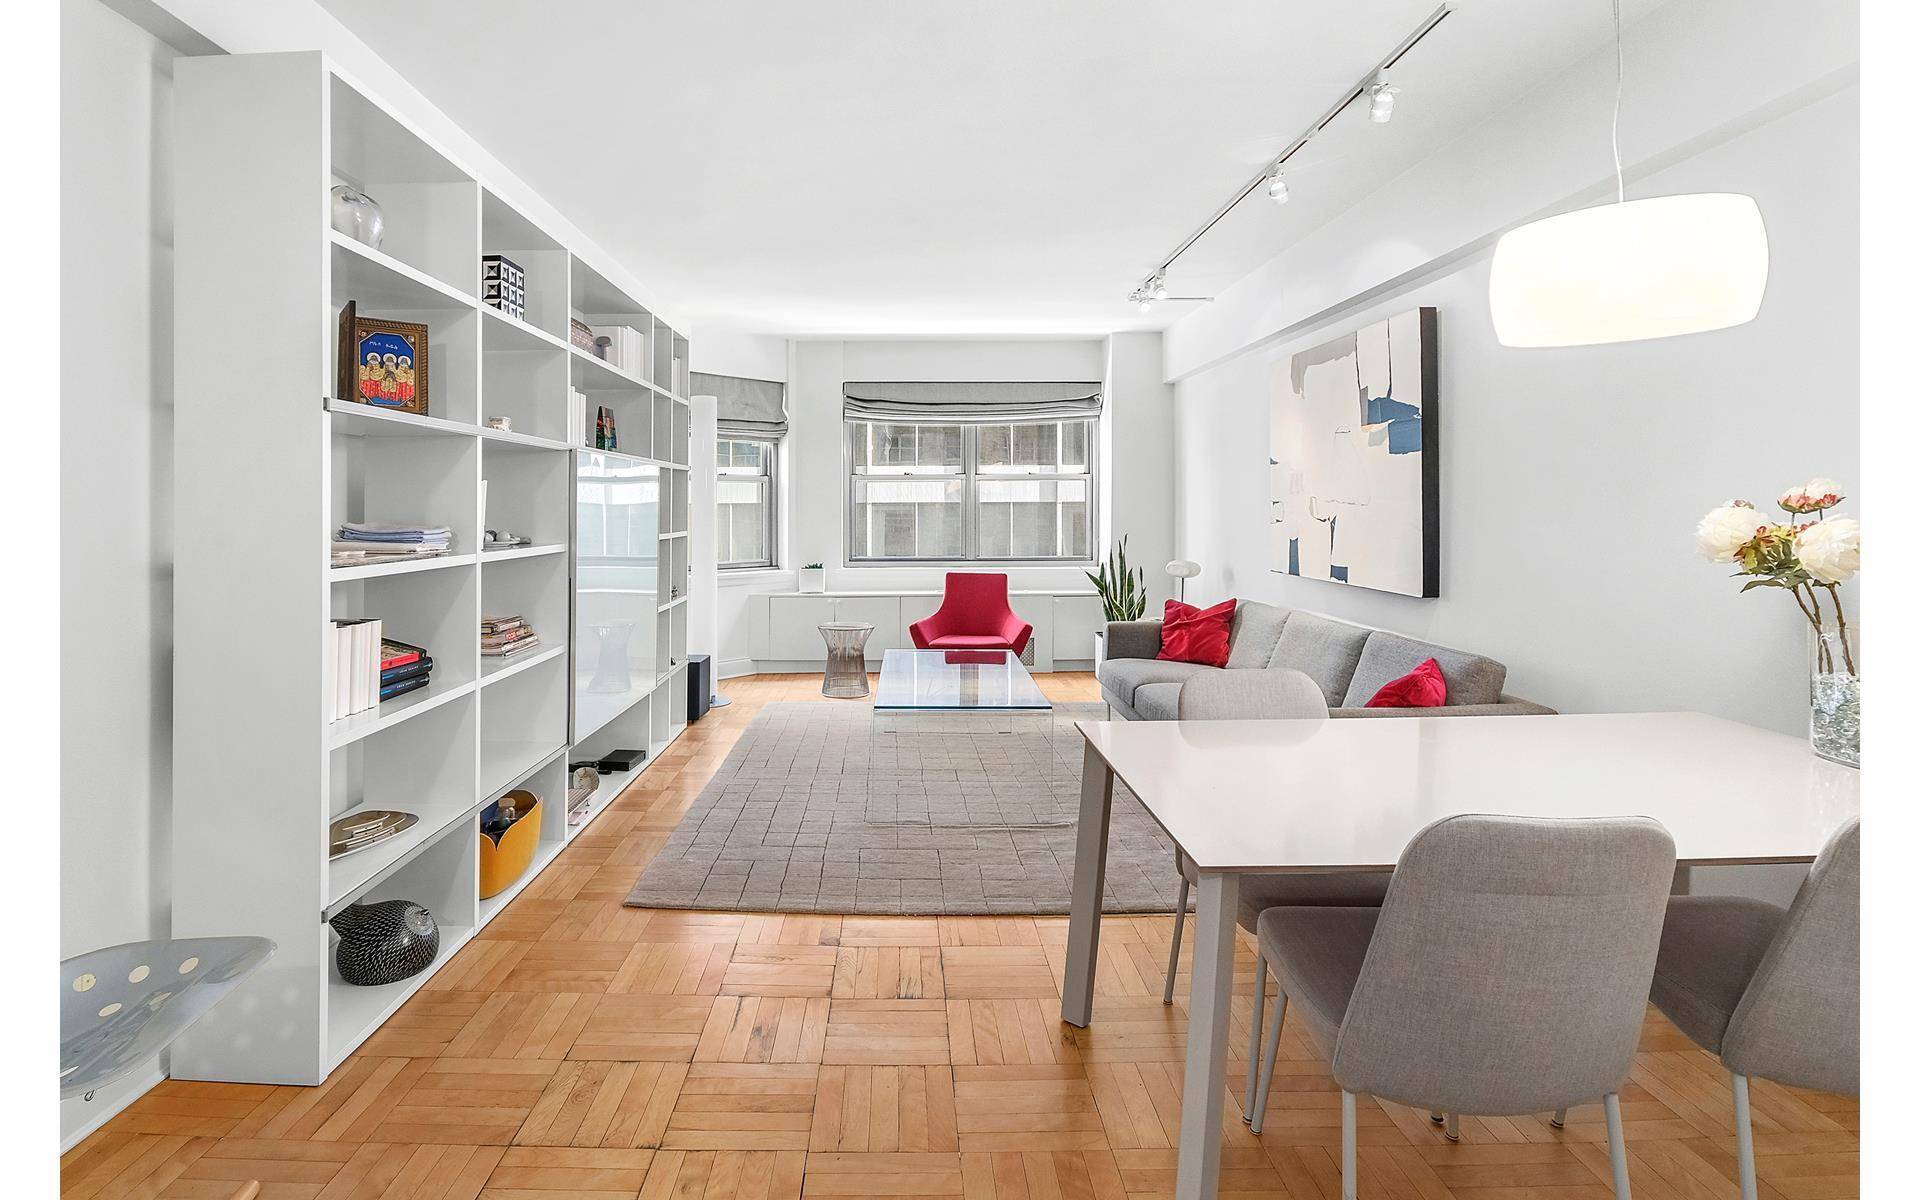 Midcentury Modern 1 bedroom Condo in MidtownLarge one bedroom located a few blocks from Grand Central Station, Bryant Park and New York Public Library.